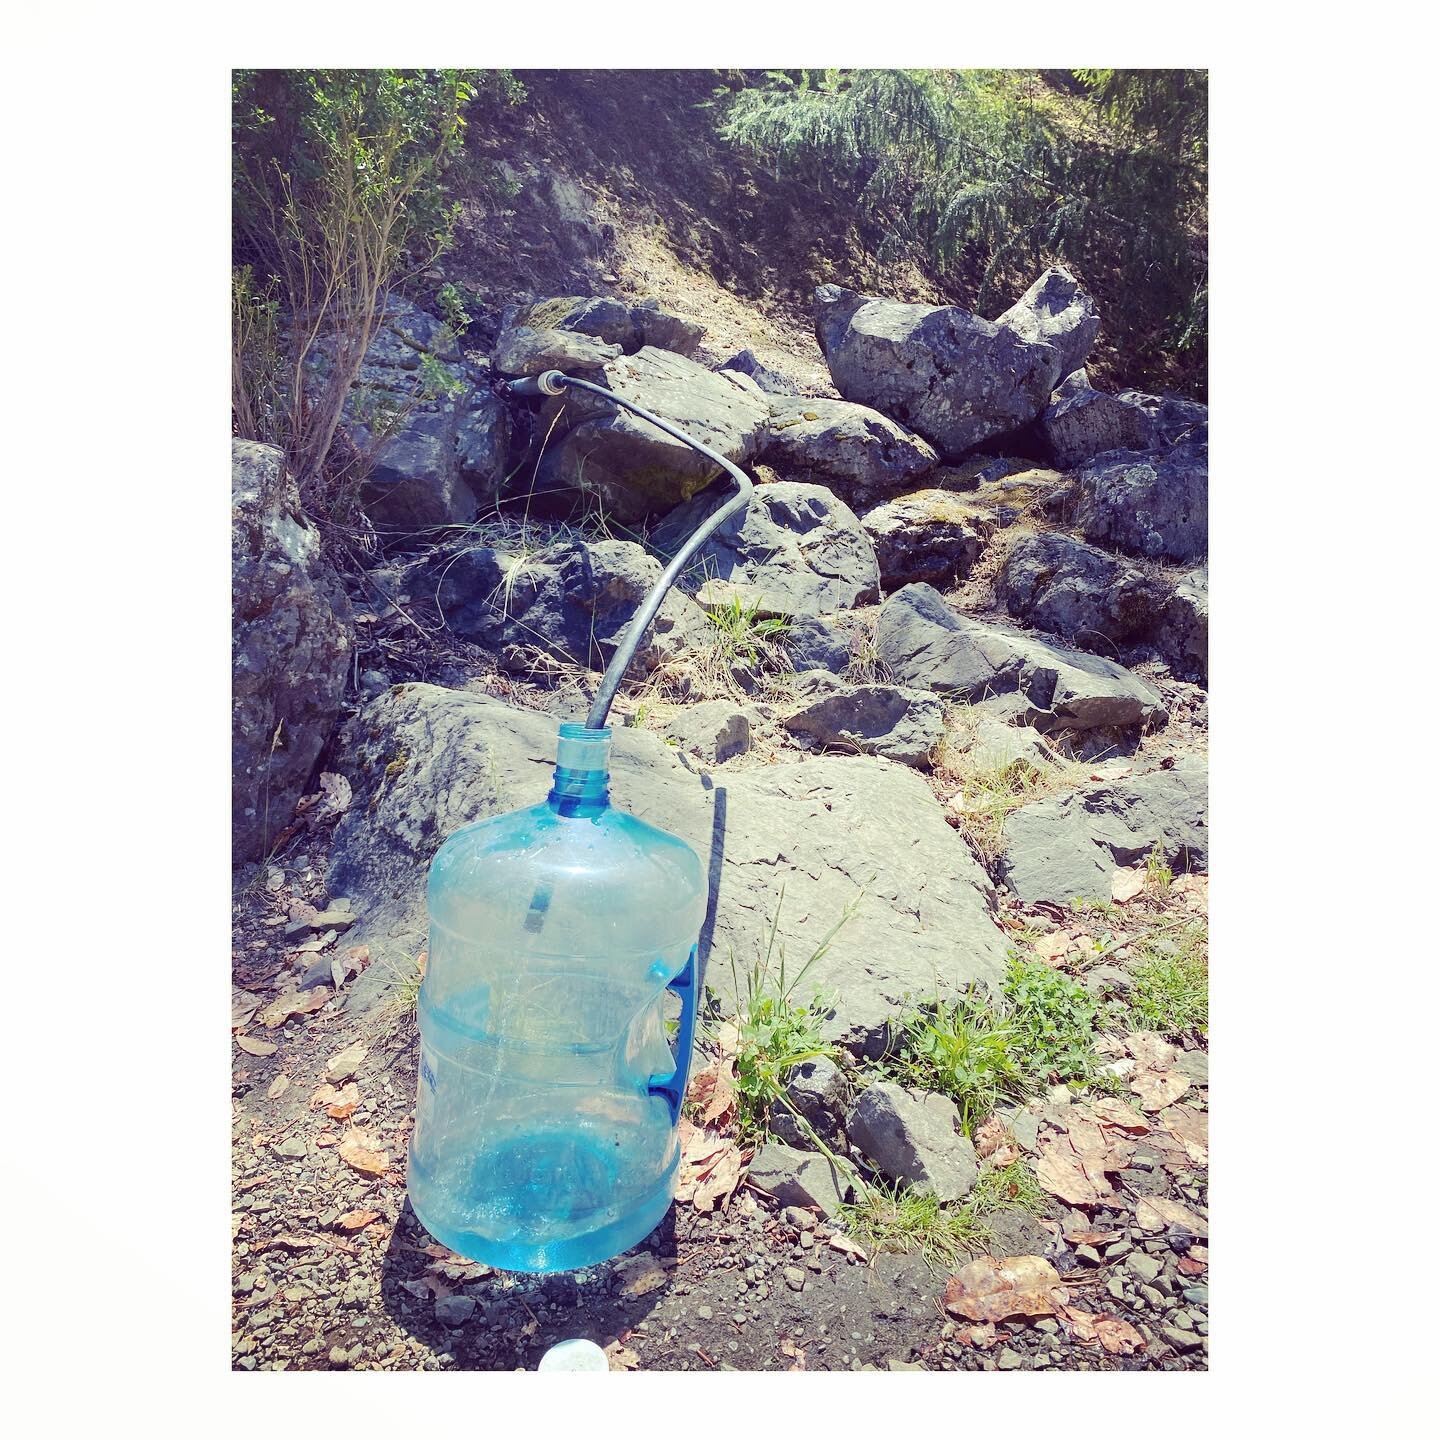 I collect fresh mountain spring water for use in all of my skin therapy treatments from steamed towels to beauty water elixirs. HYDRATION is key. 
💧🦋💧
.
the water I collect in the BPA free container after hauling gets transferred to 2 smaller glas